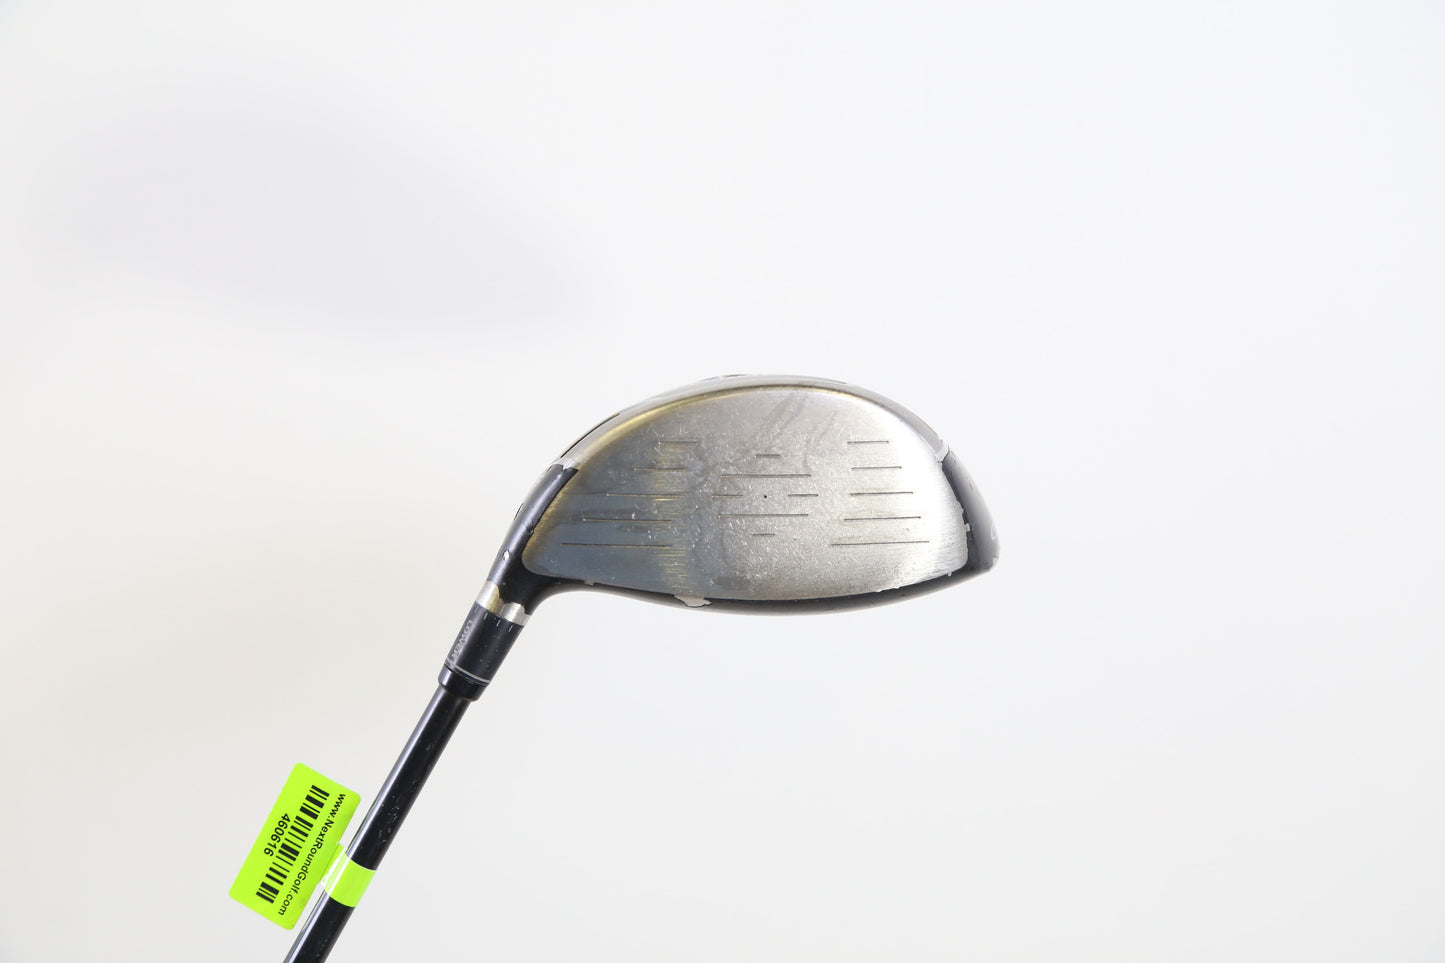 Used TaylorMade JetSpeed Driver - Right-Handed - 10.5 Degrees - Regular Flex